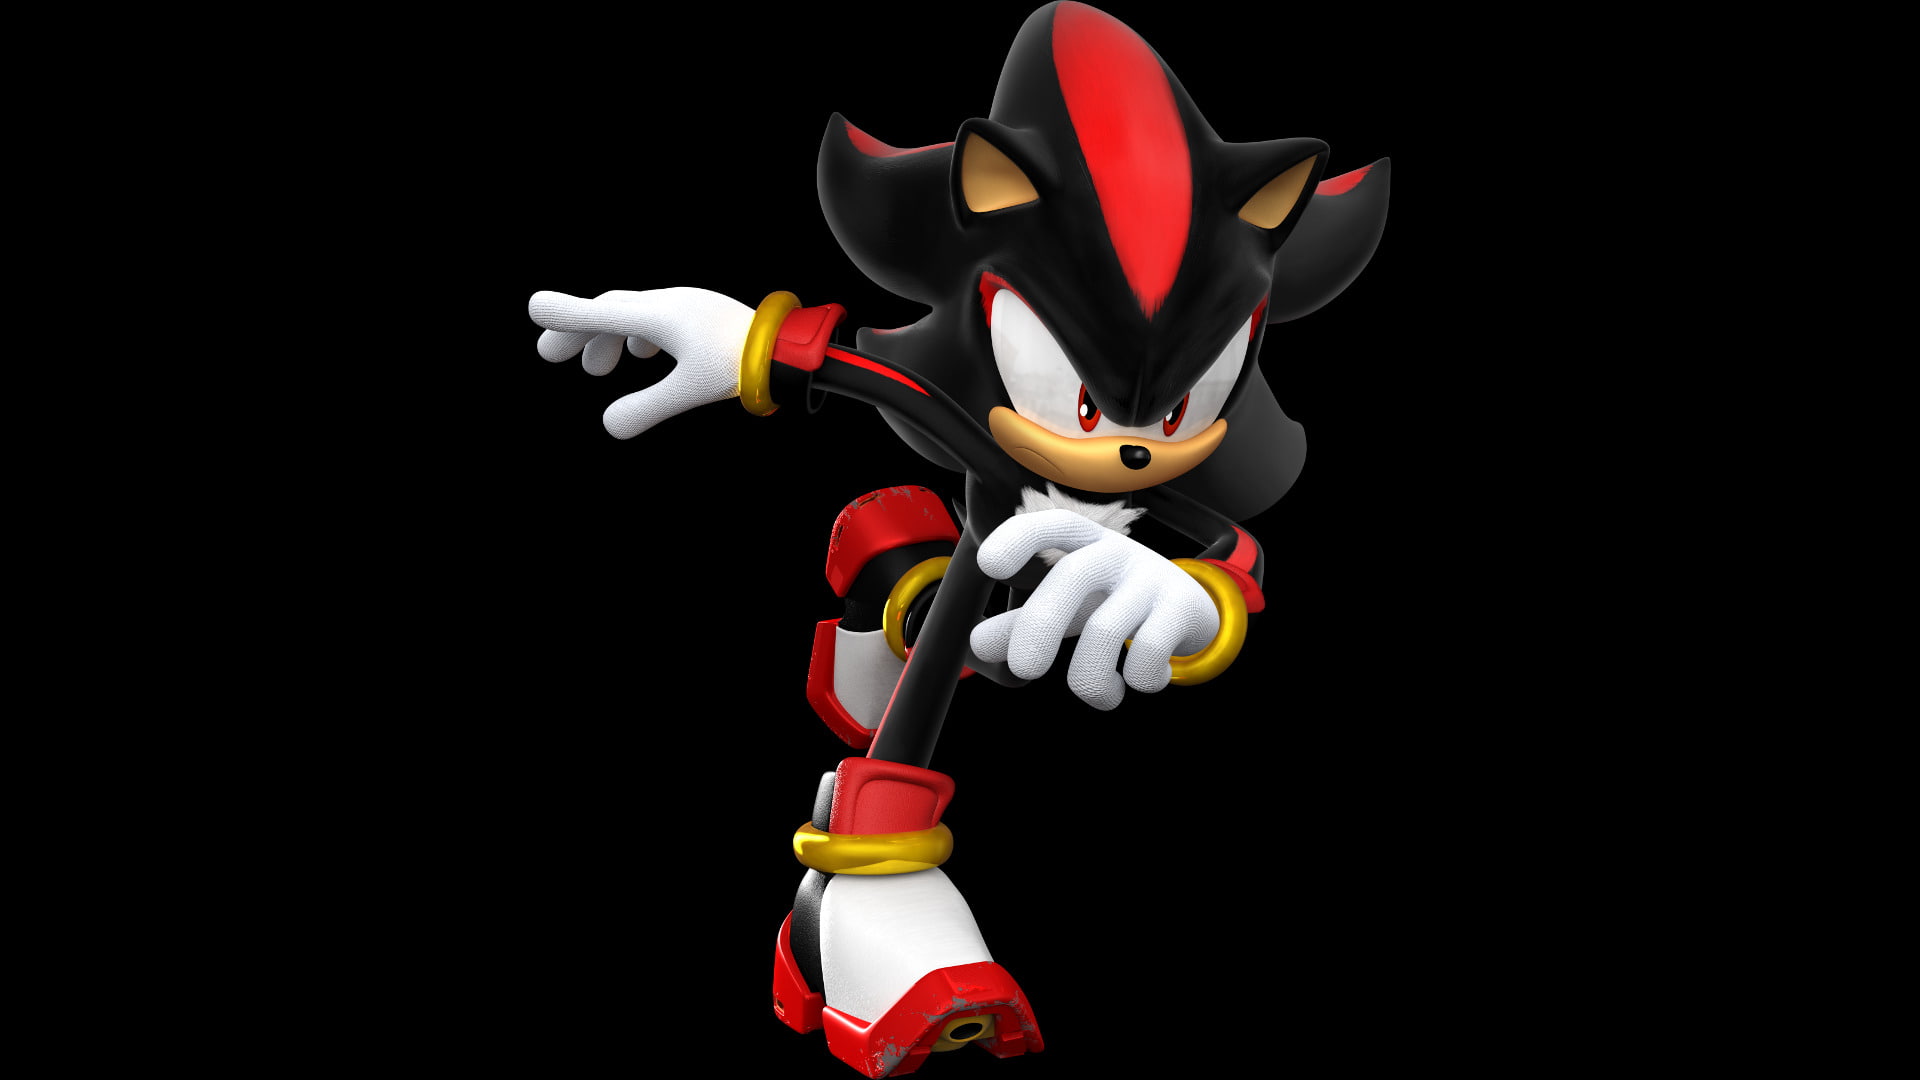 Shadow from Sonic illustration, Shadow the Hedgehog